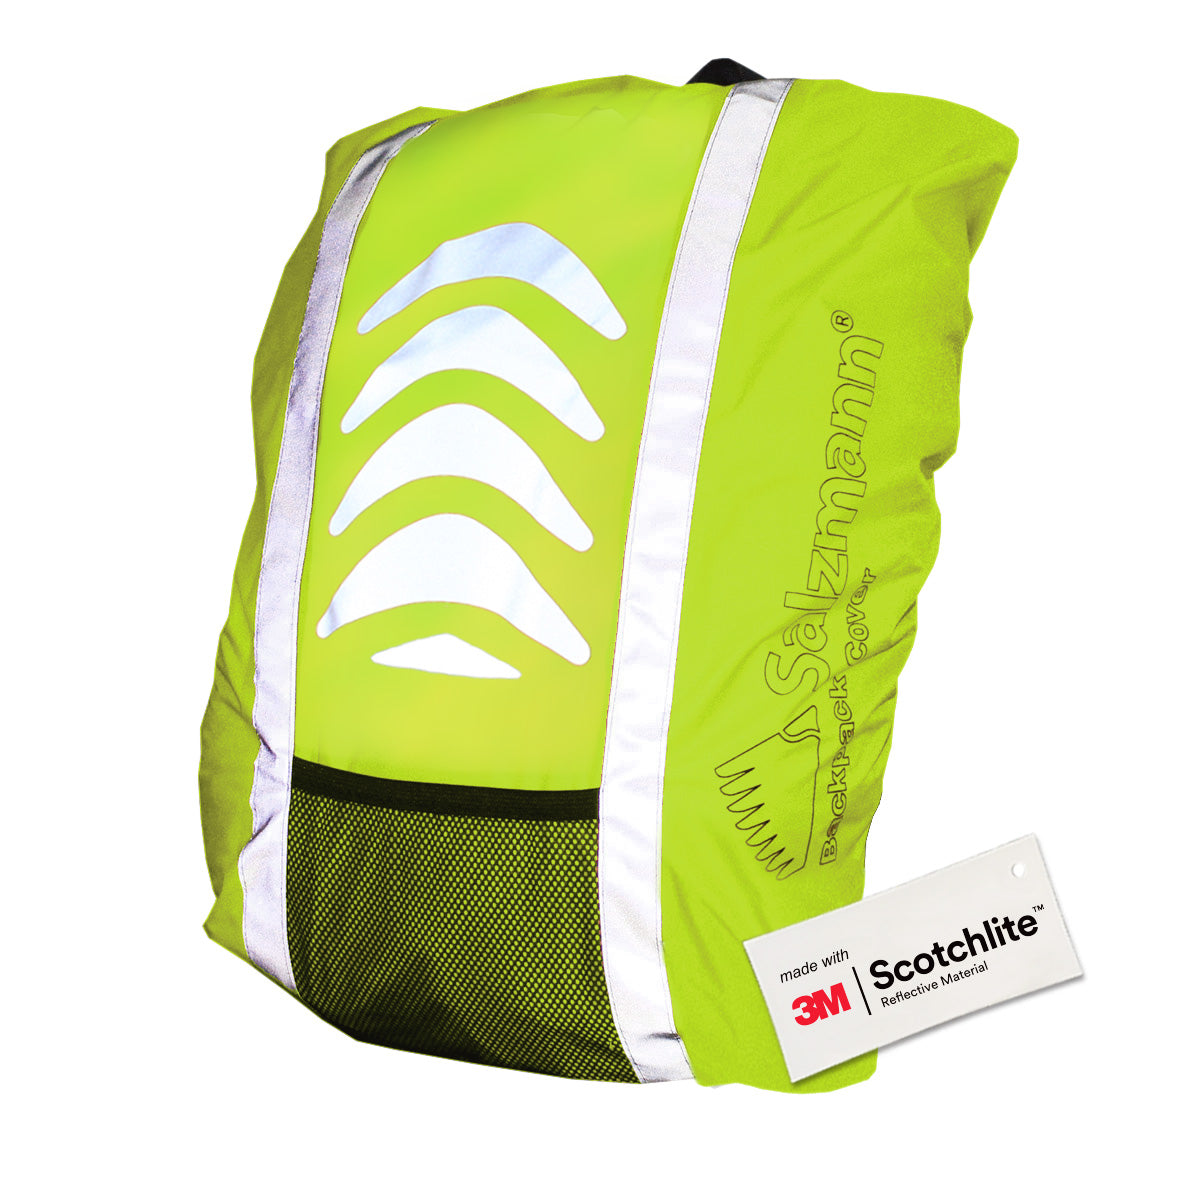 Amazon.com: Reflective Apparel High Visibility Waterproof Safety Backpack -  3M Reflective Tape, 100% Polyester Oxford - Lime, 14